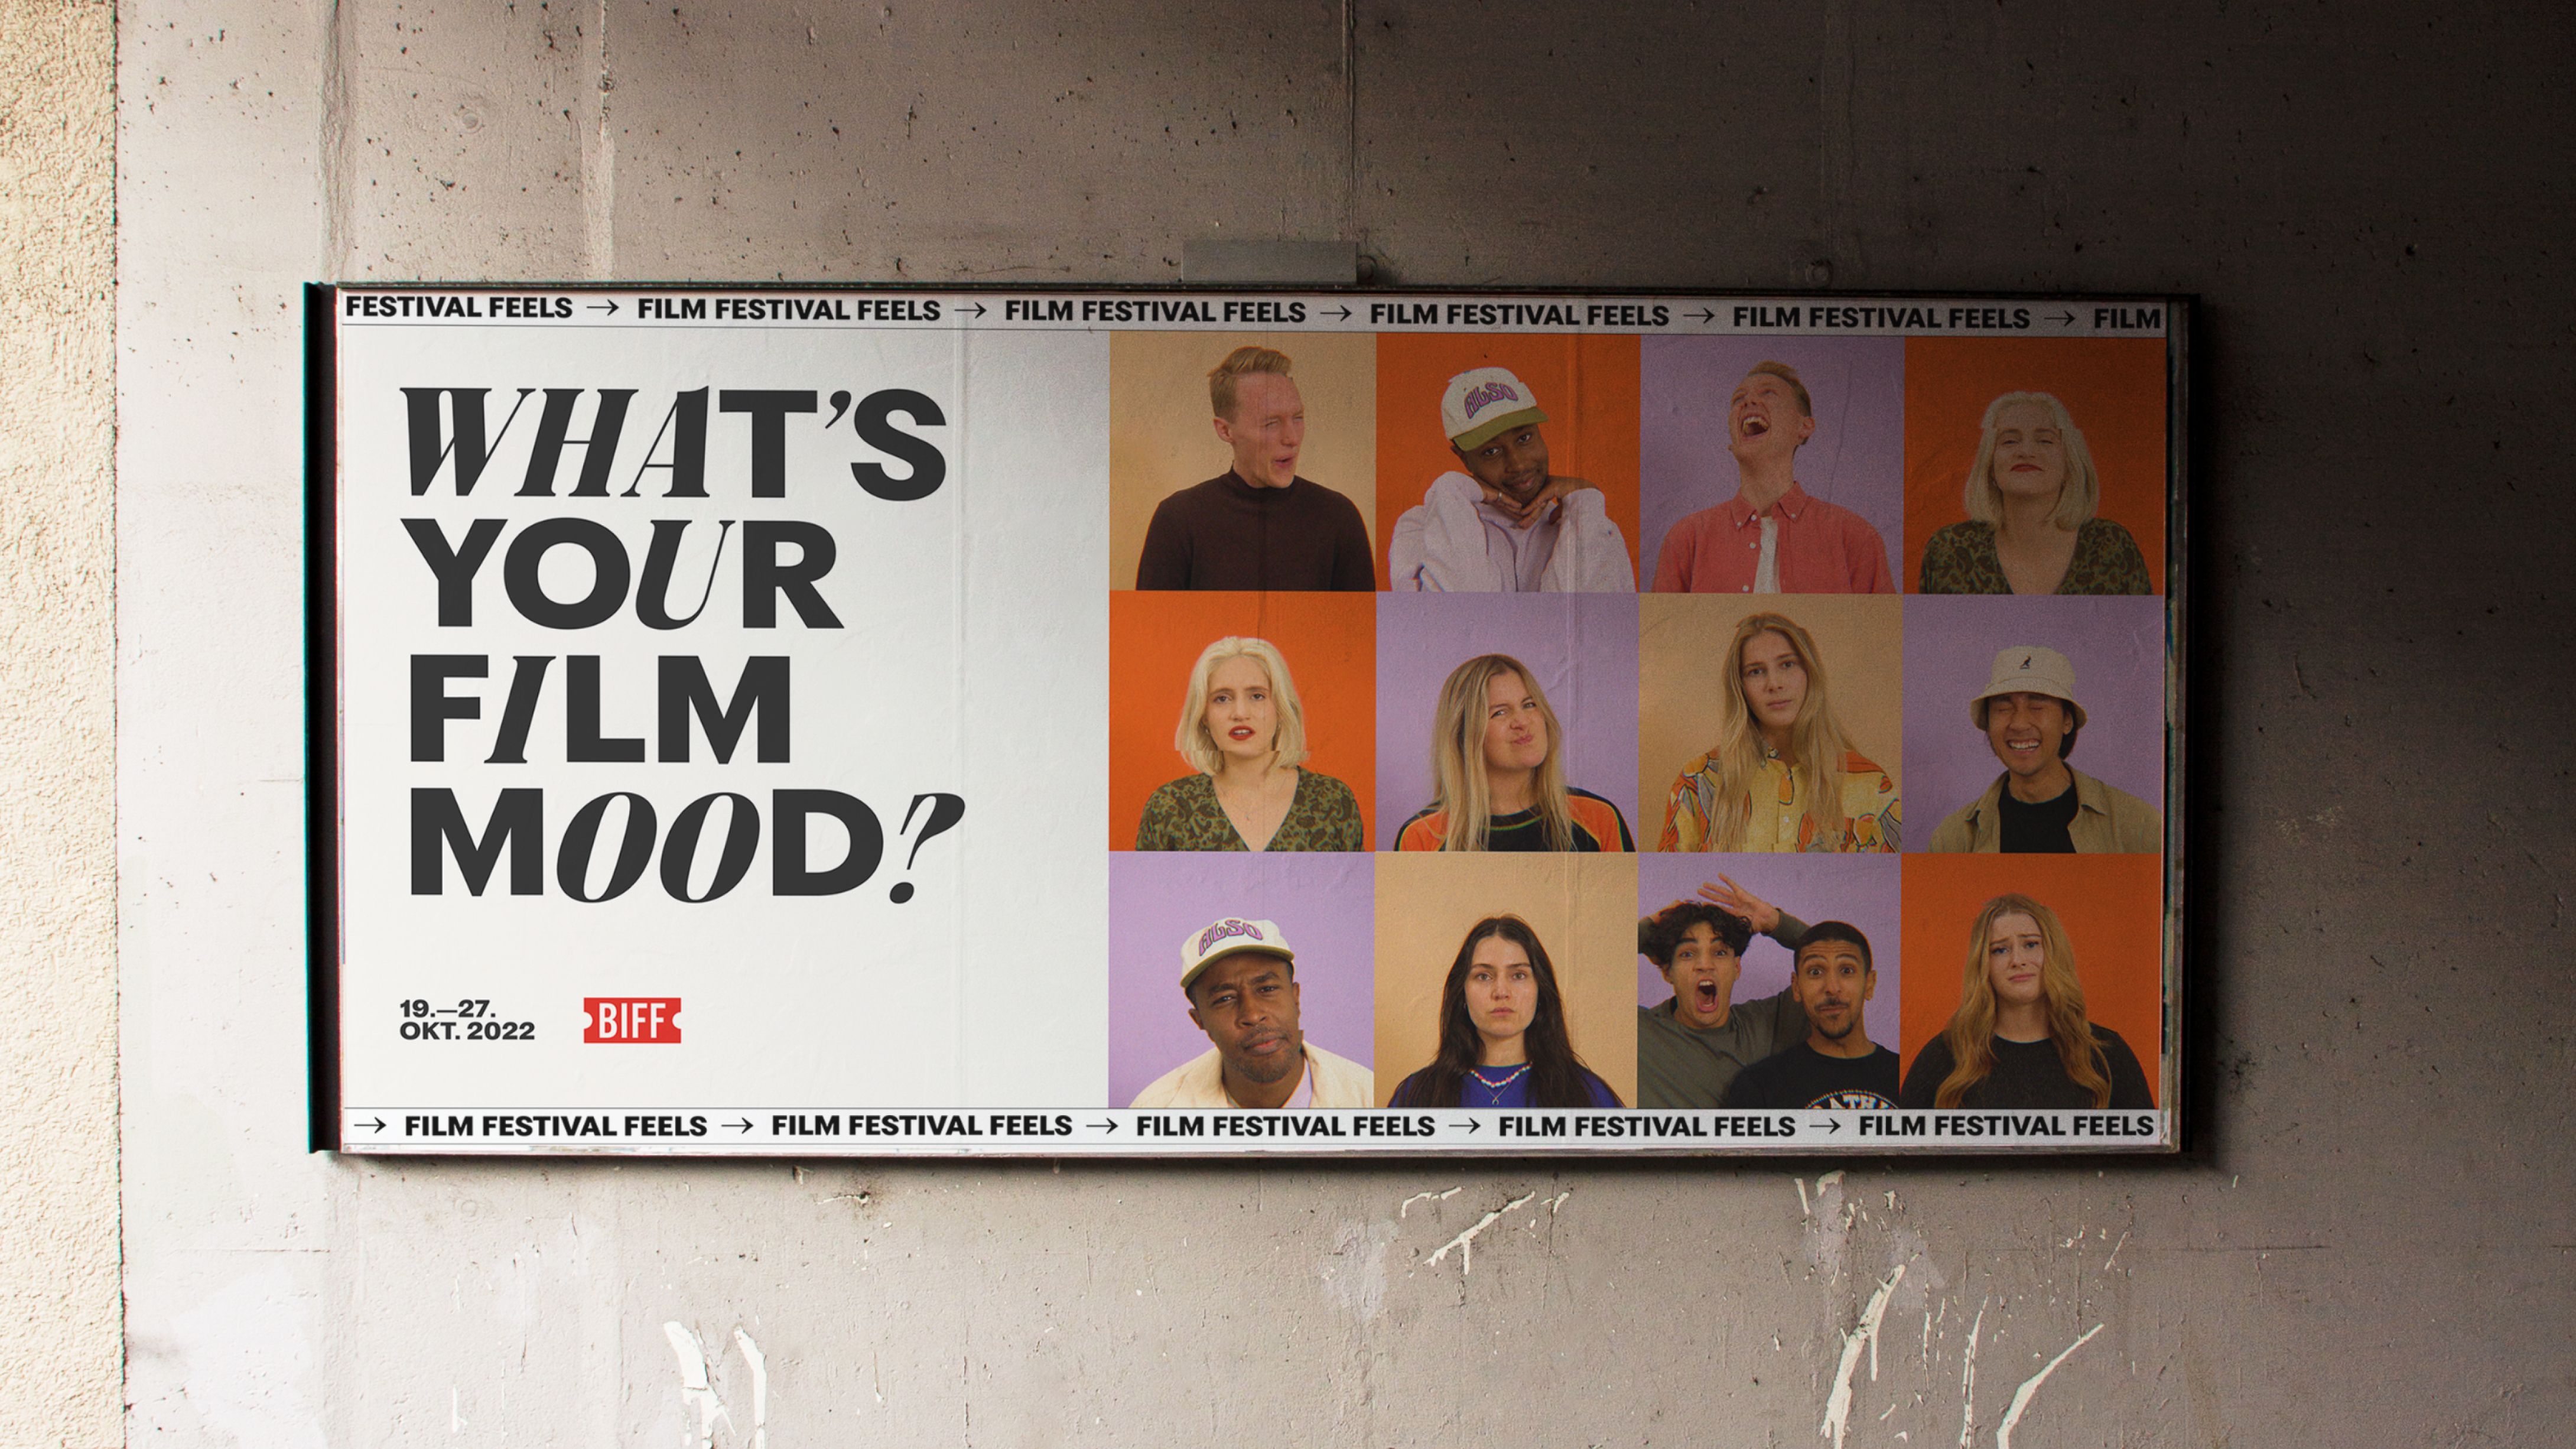 Poster with colourful portraits and a title saying "What's your film mood?"